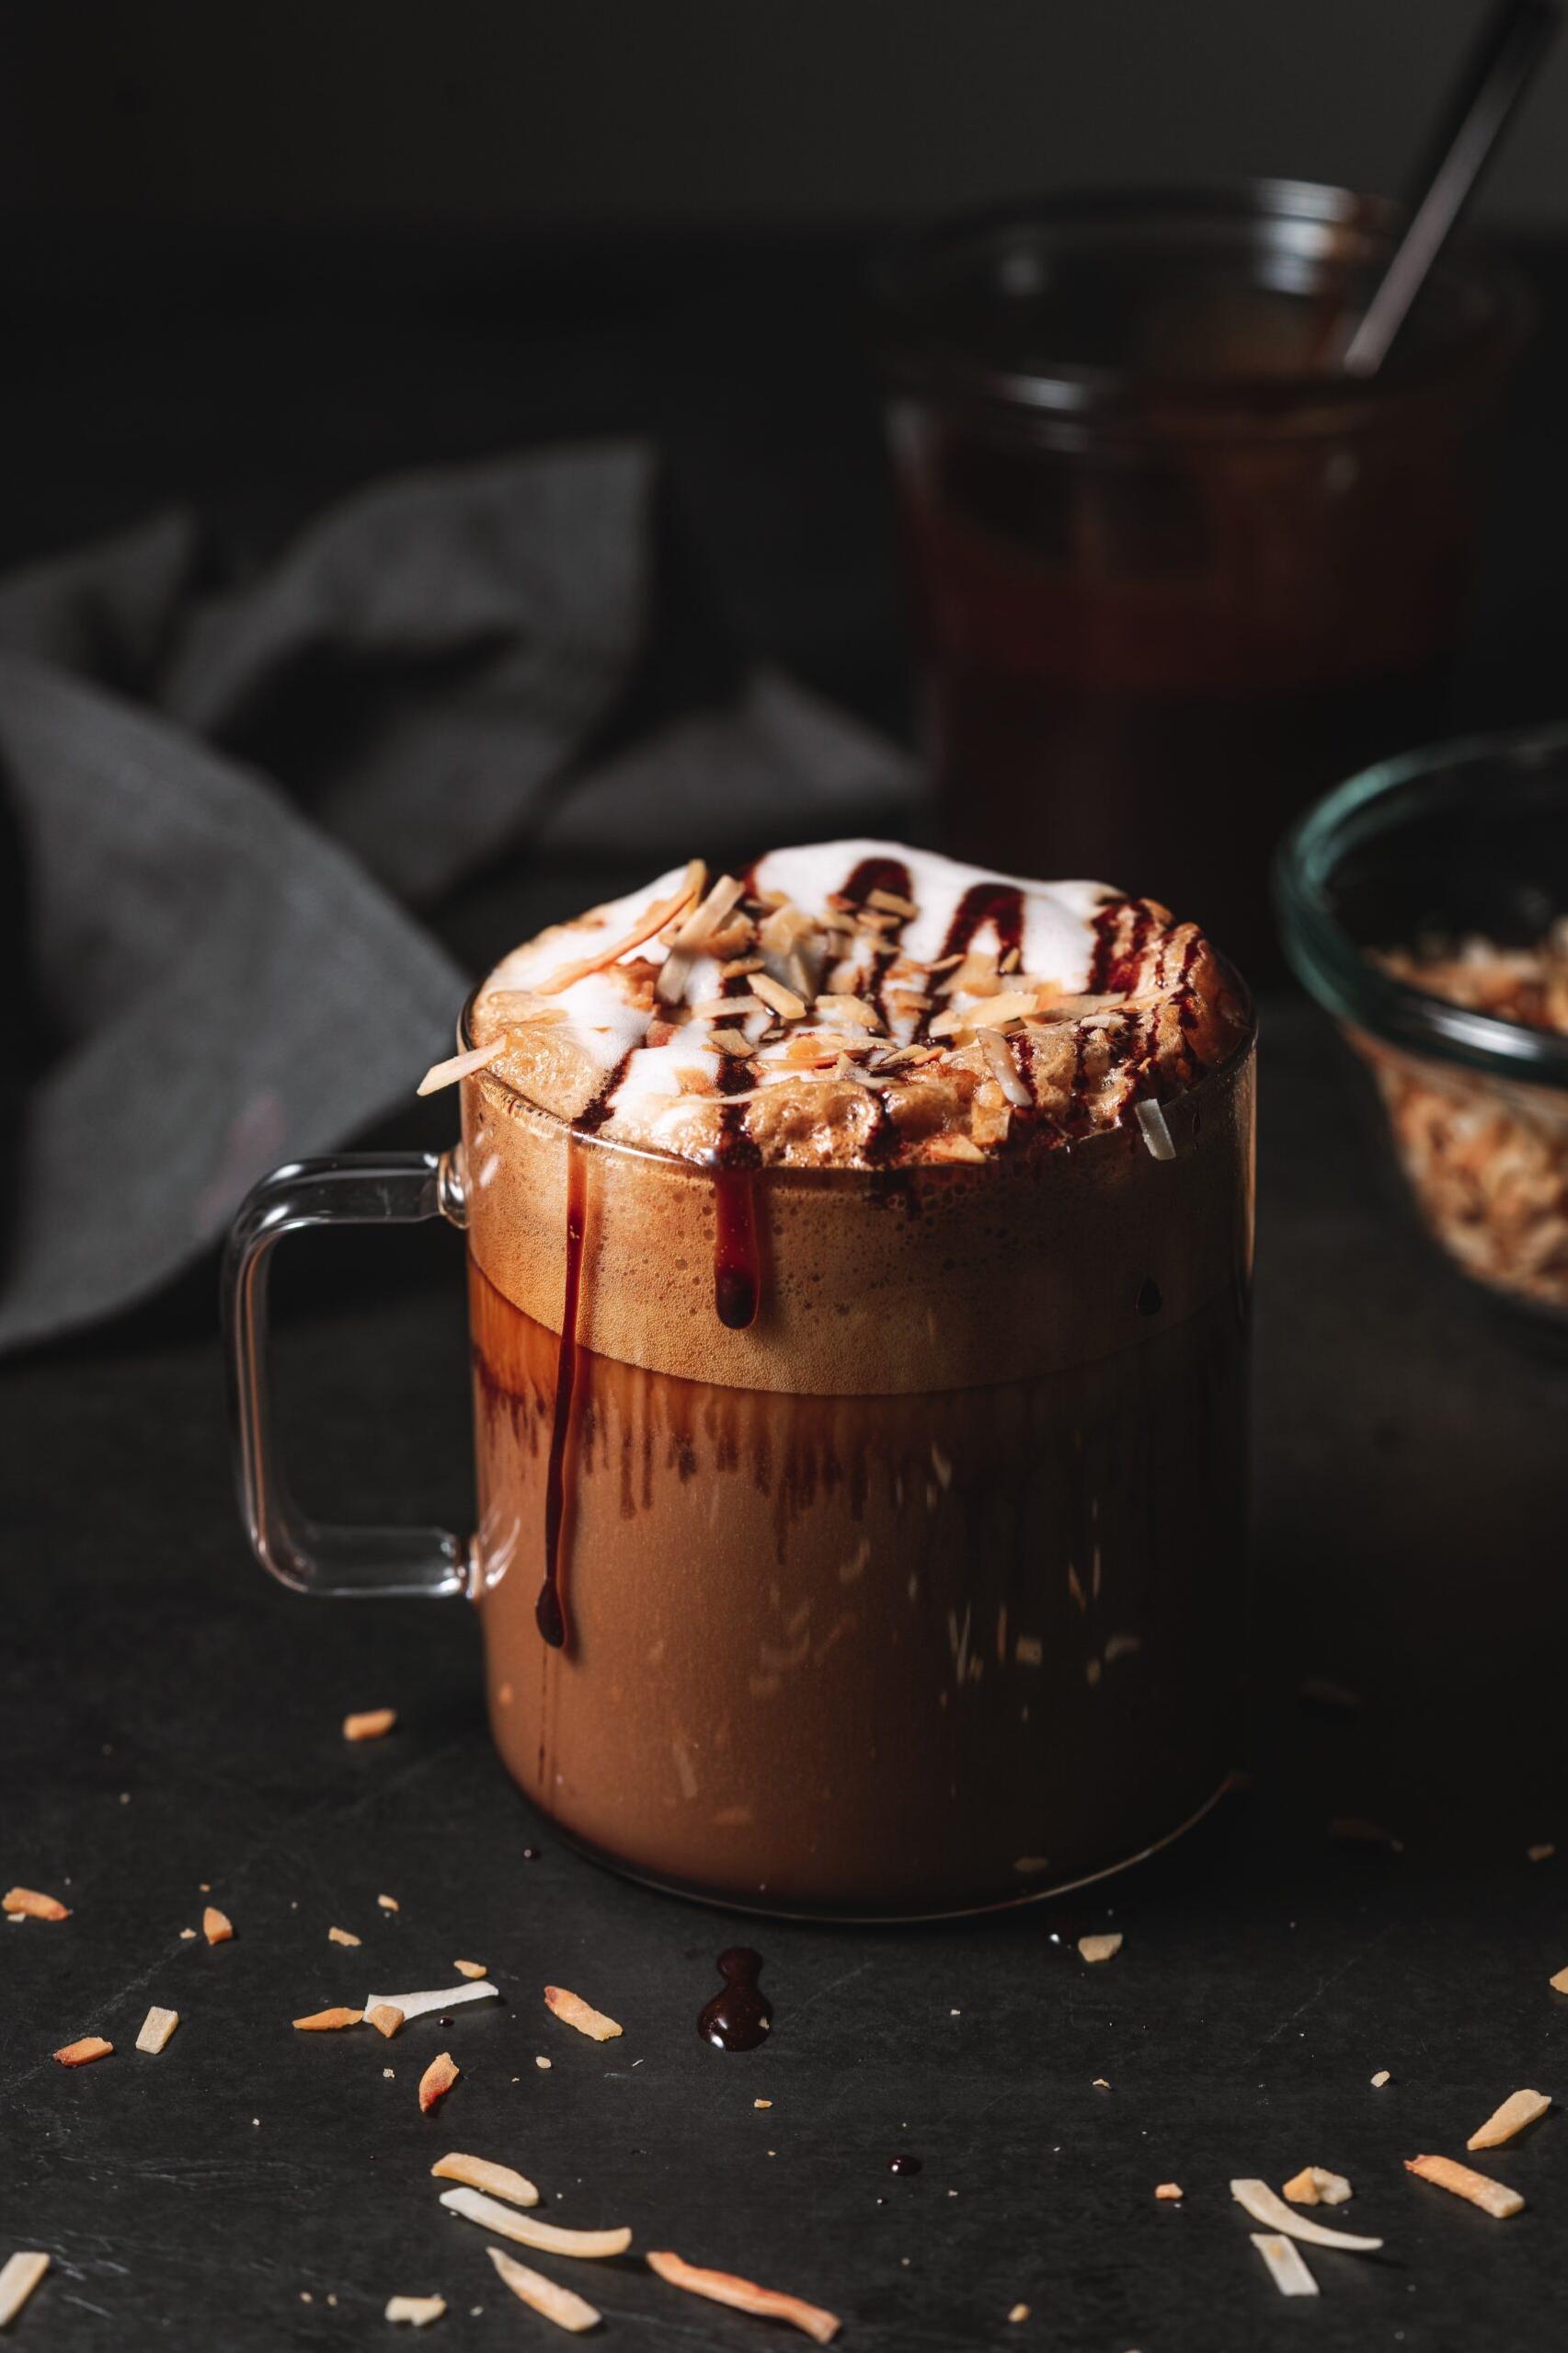  Why settle for plain coffee when you can have a delicious mocha latte at home?